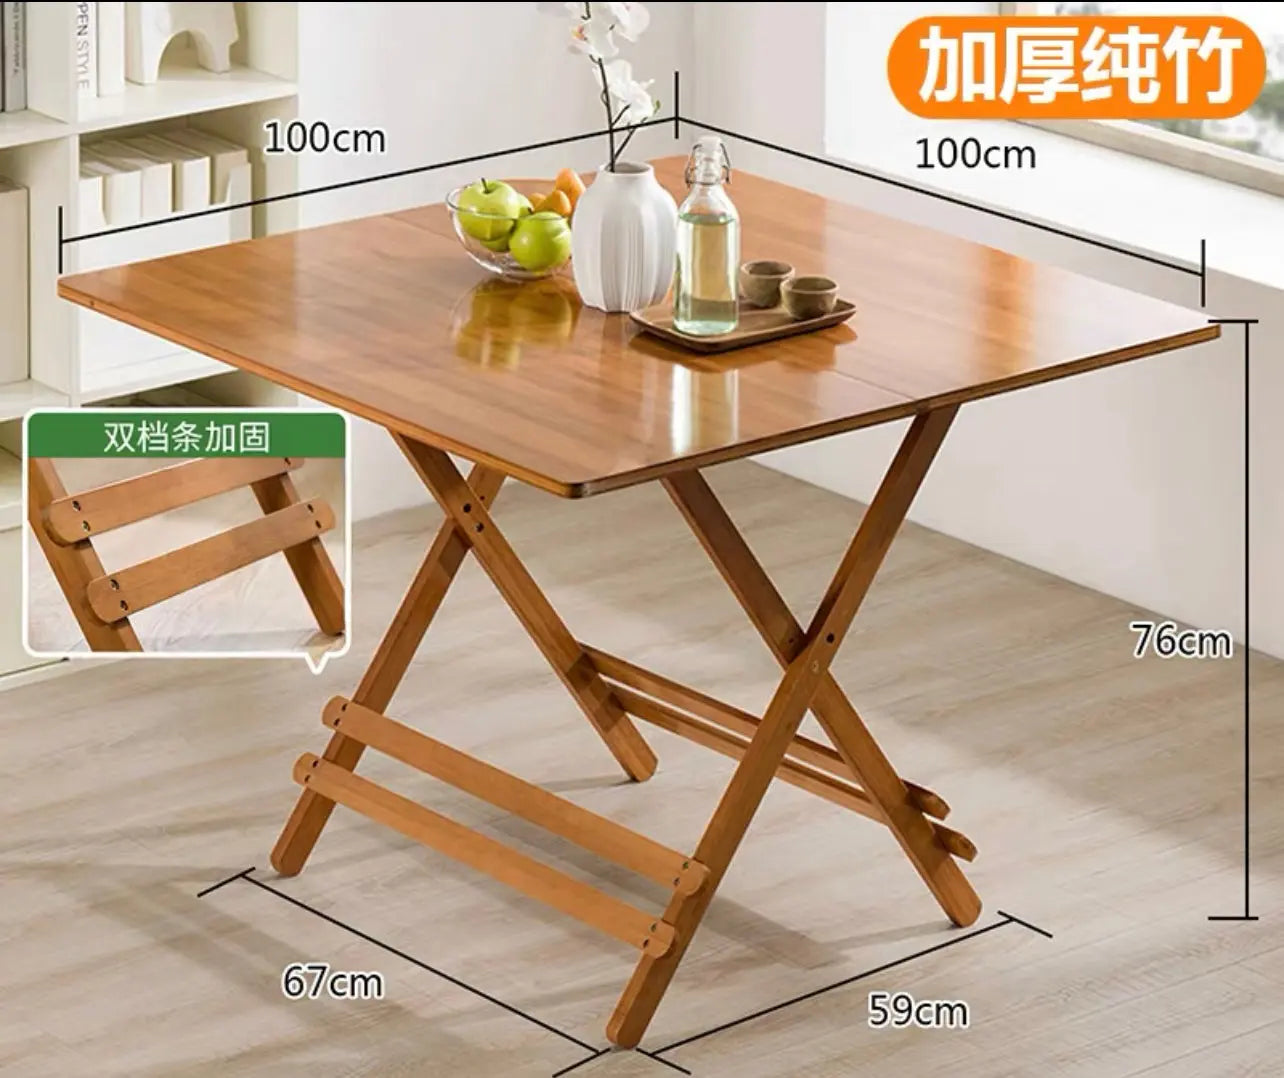 Bamboo Wooden Table Stool Foldable Dining Study Picnic Camping Handy Indoor Outdoor everythingbamboo